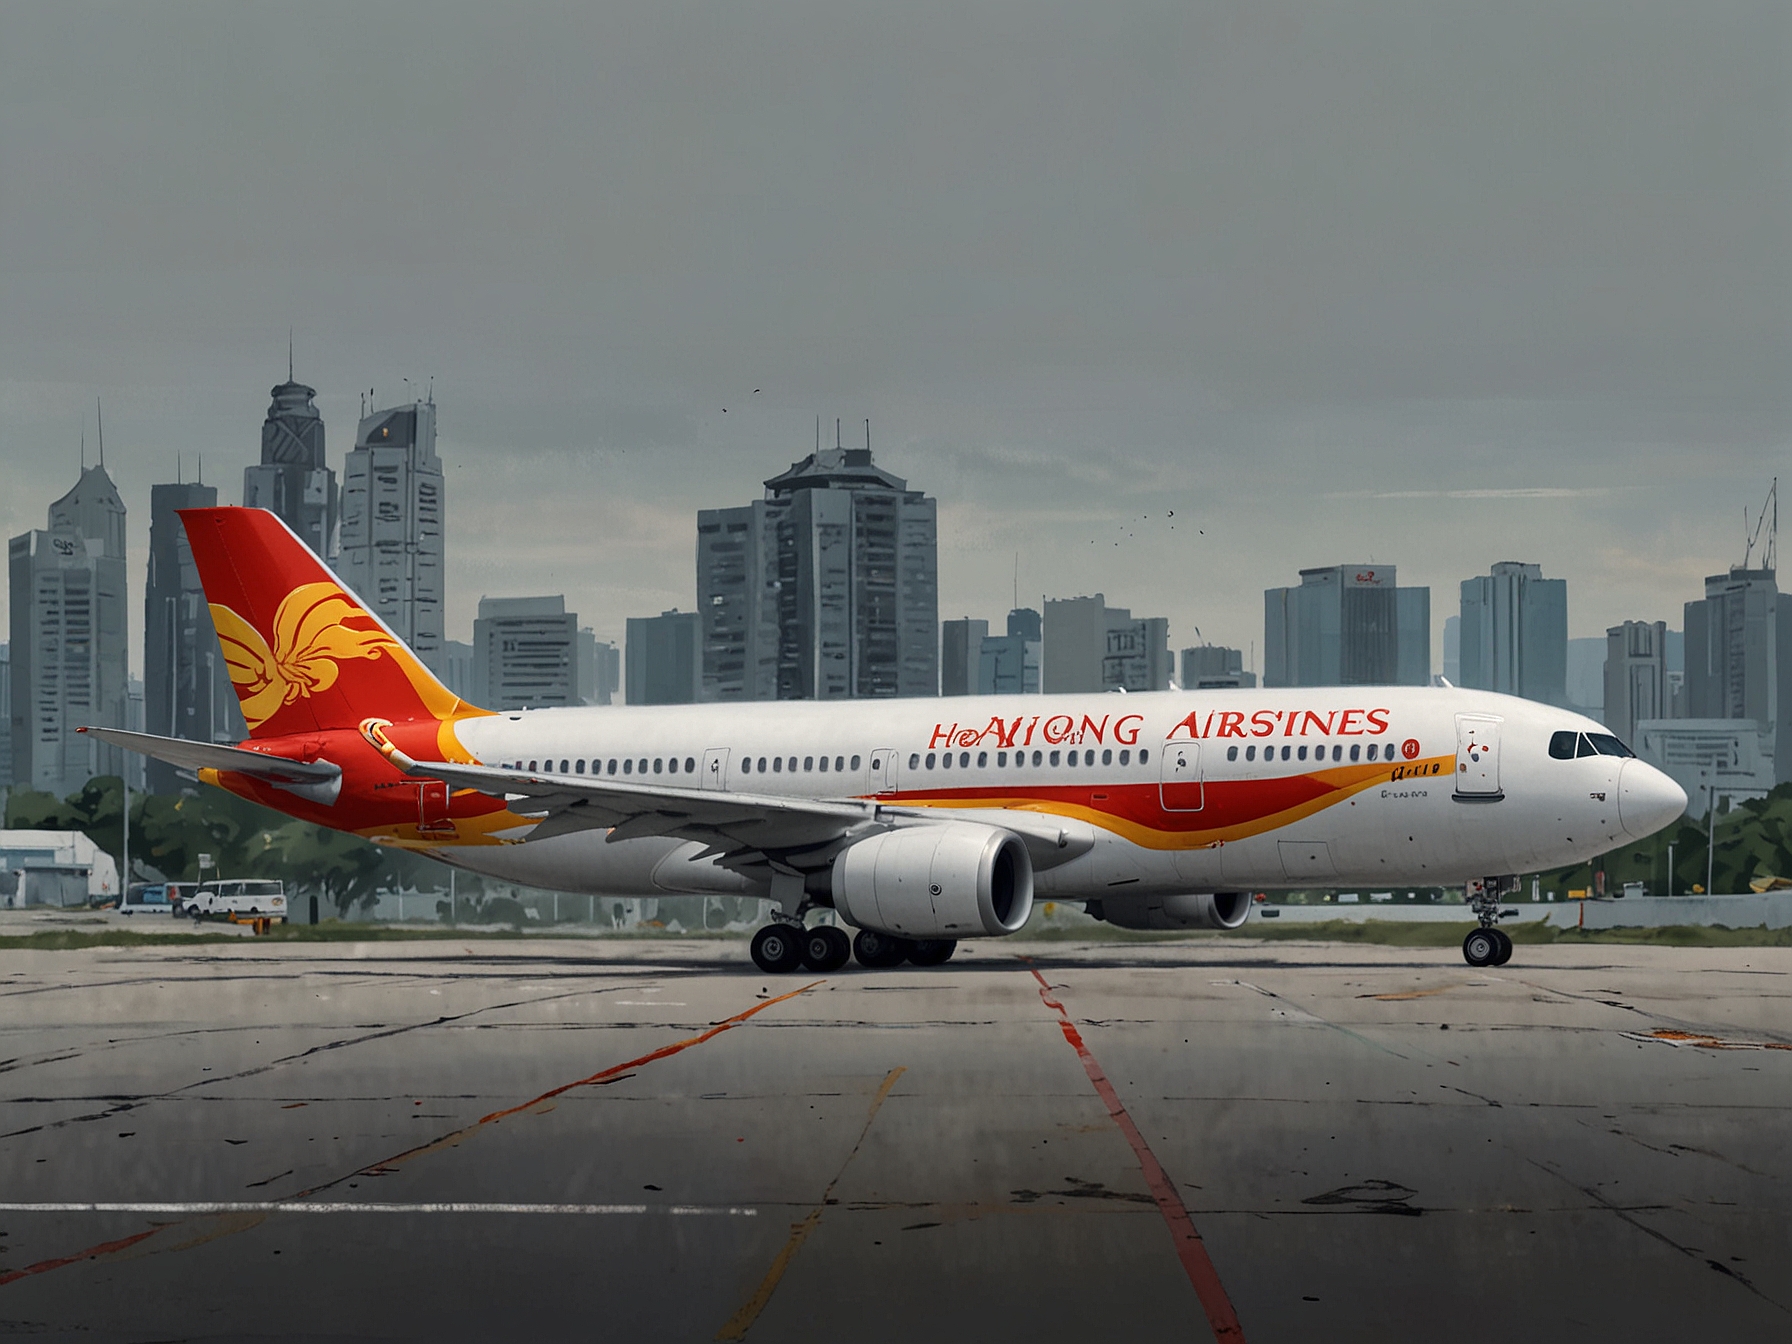 A Hong Kong Airlines aircraft on the tarmac, symbolizing the company's ambitious plans for growth and the integration of new flight routes supported by a recruitment drive in Thailand.